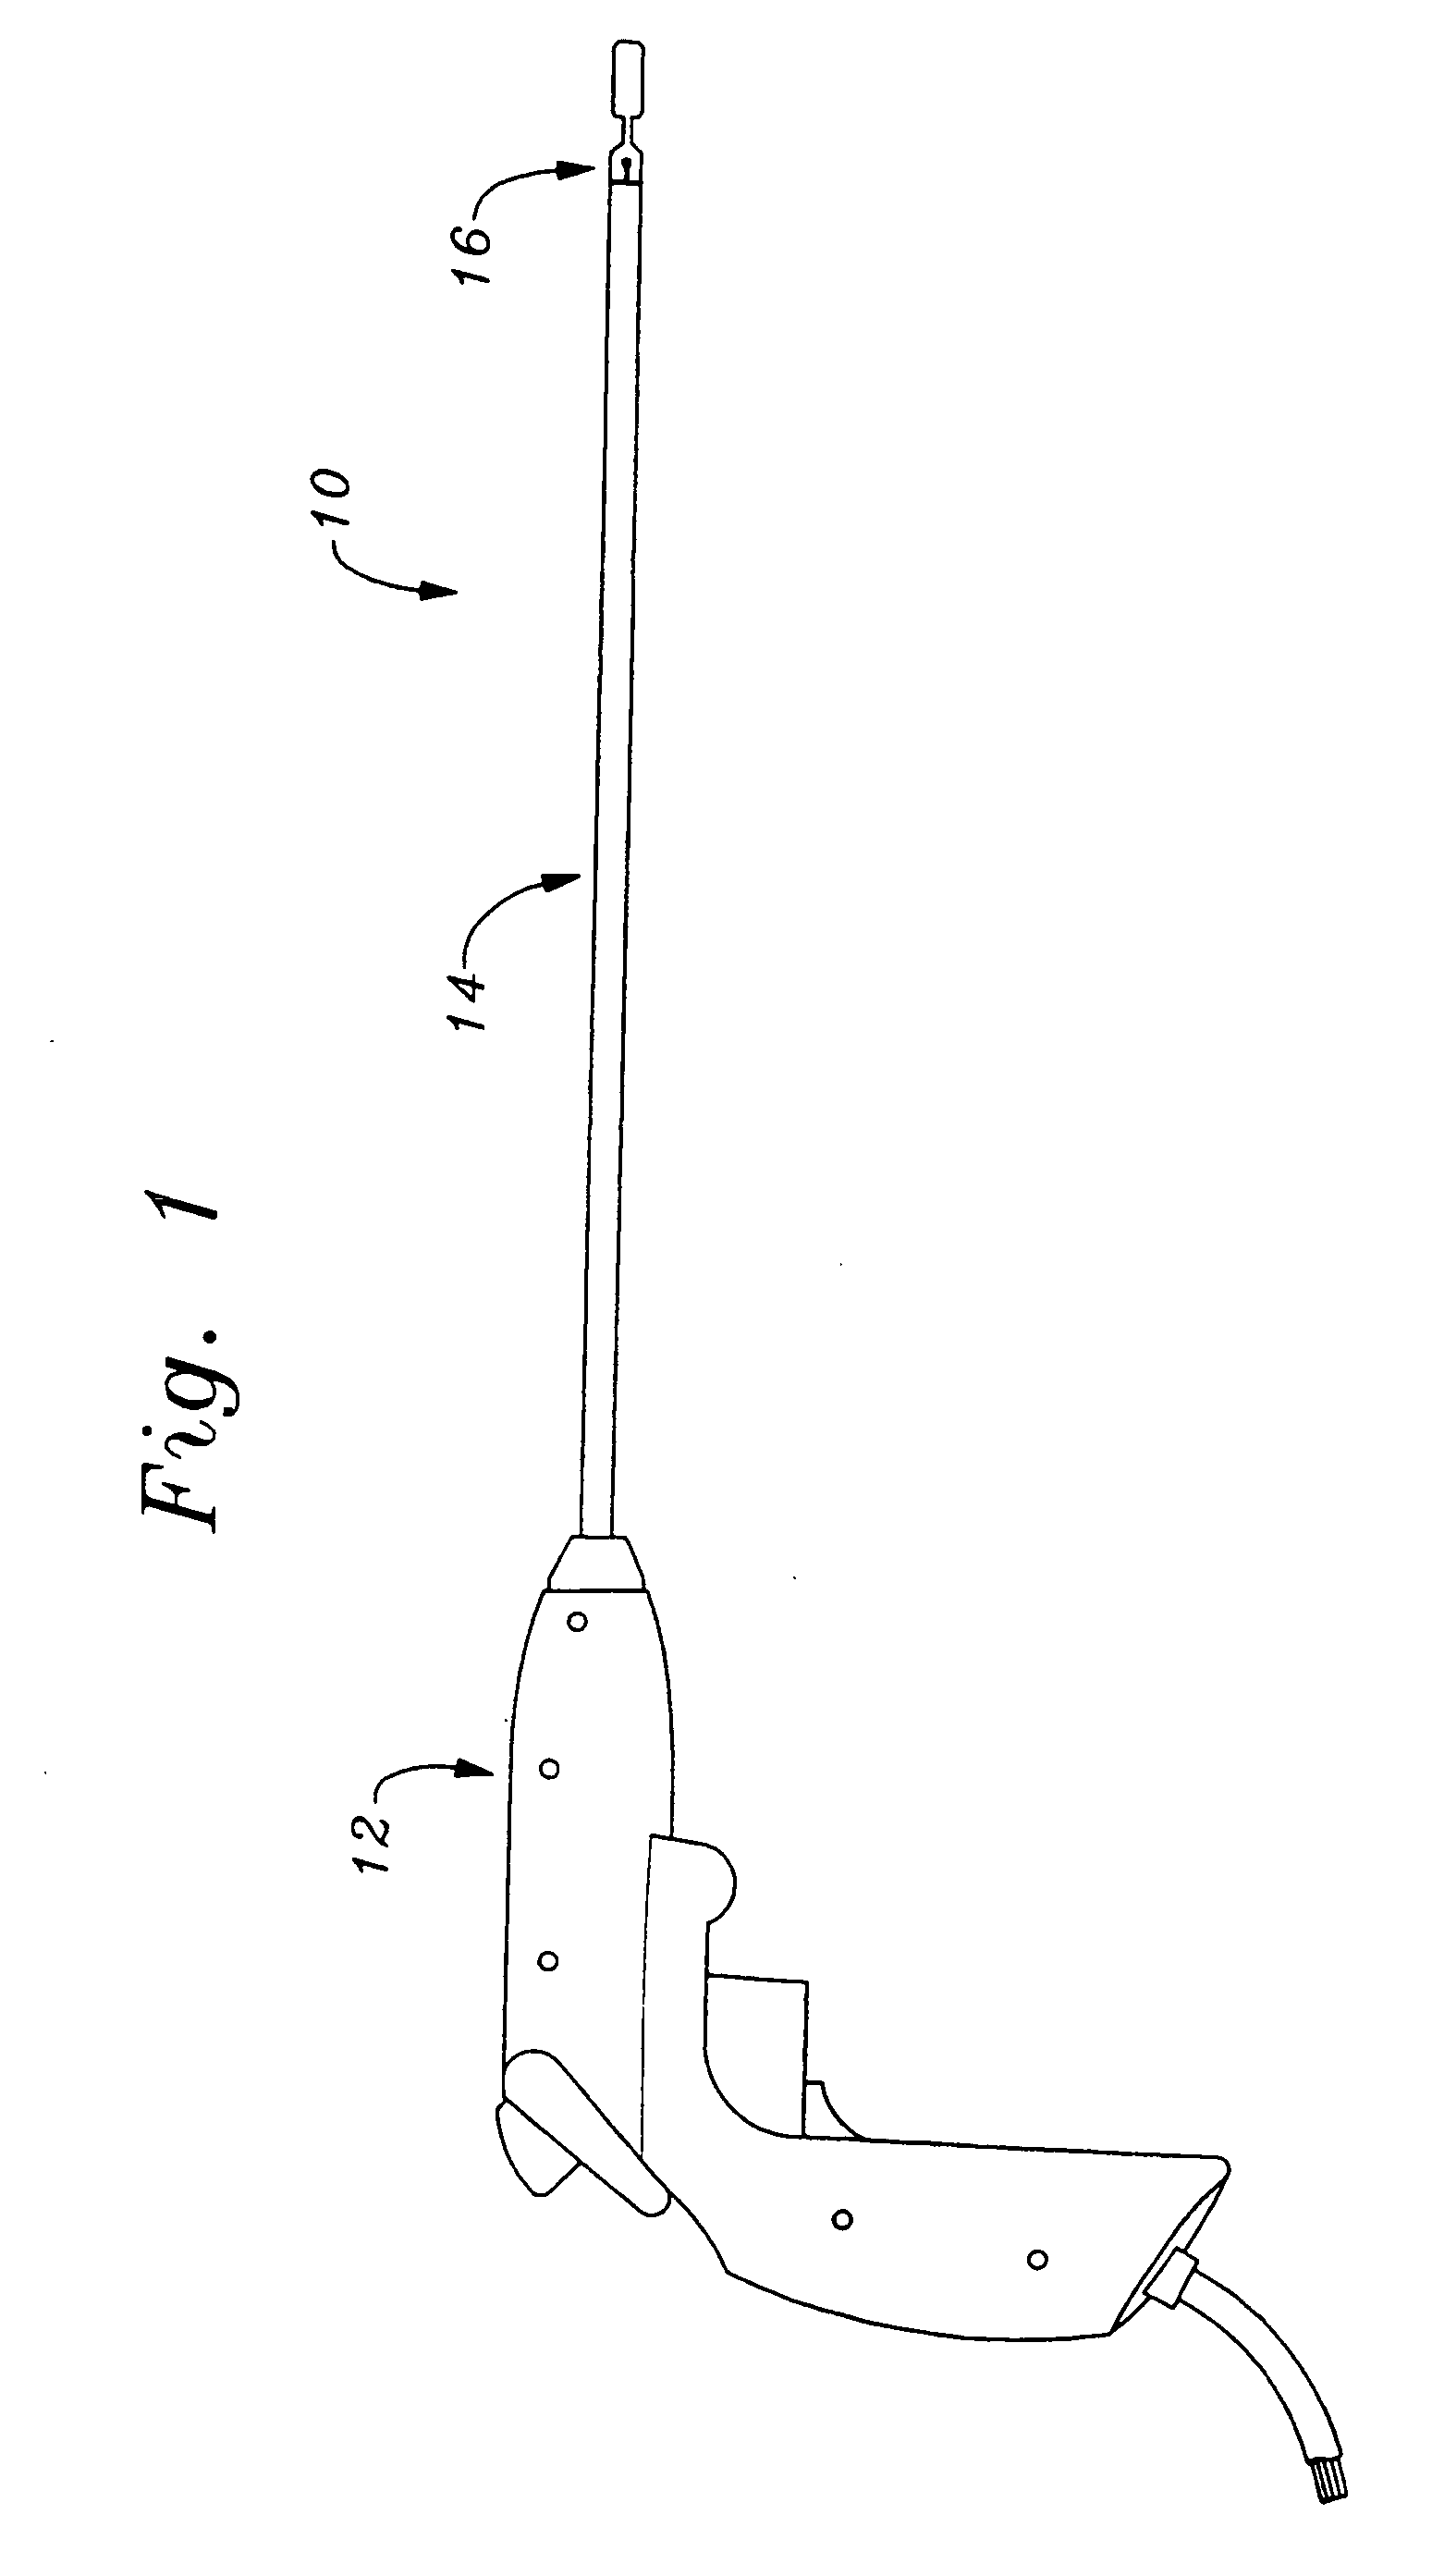 Sequential heart valve leaflet repair device and method of use